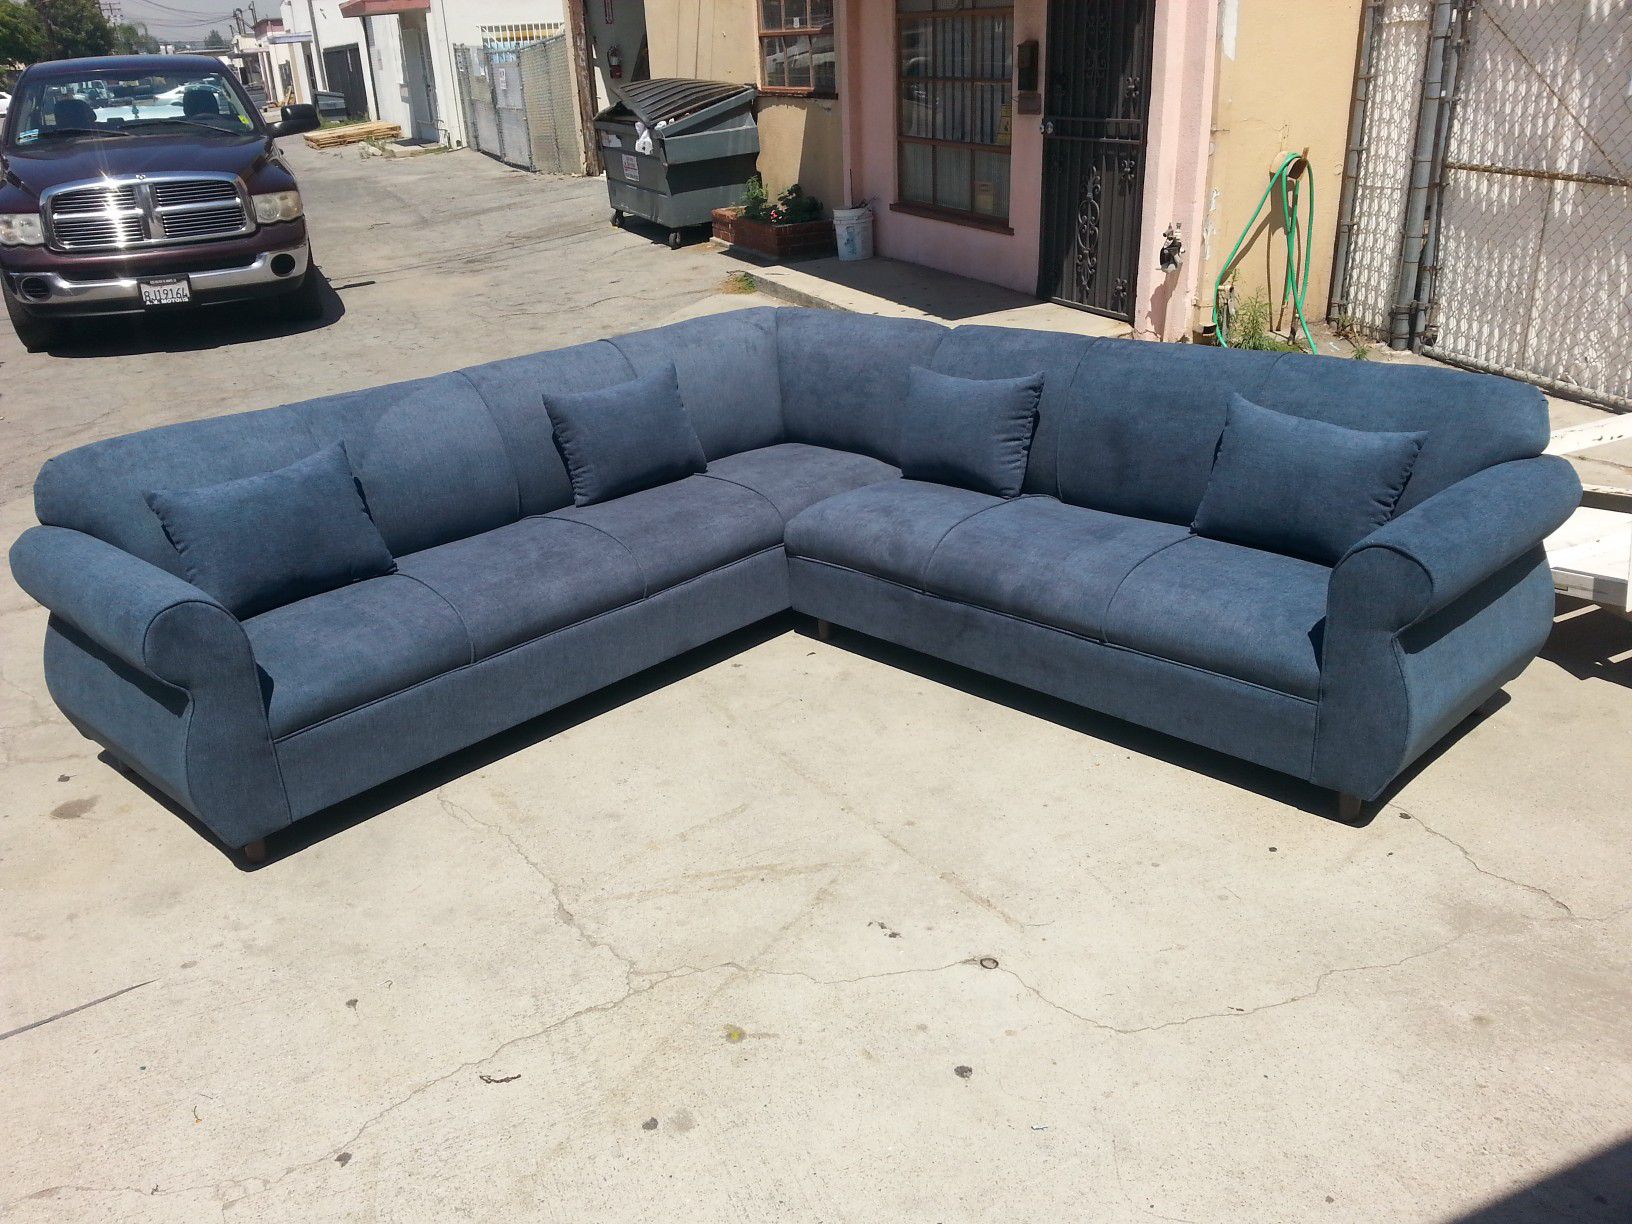 NEW 9X9FT ANNAPOLIS STEEL BLUE FABRIC SECTIONAL COUCHES